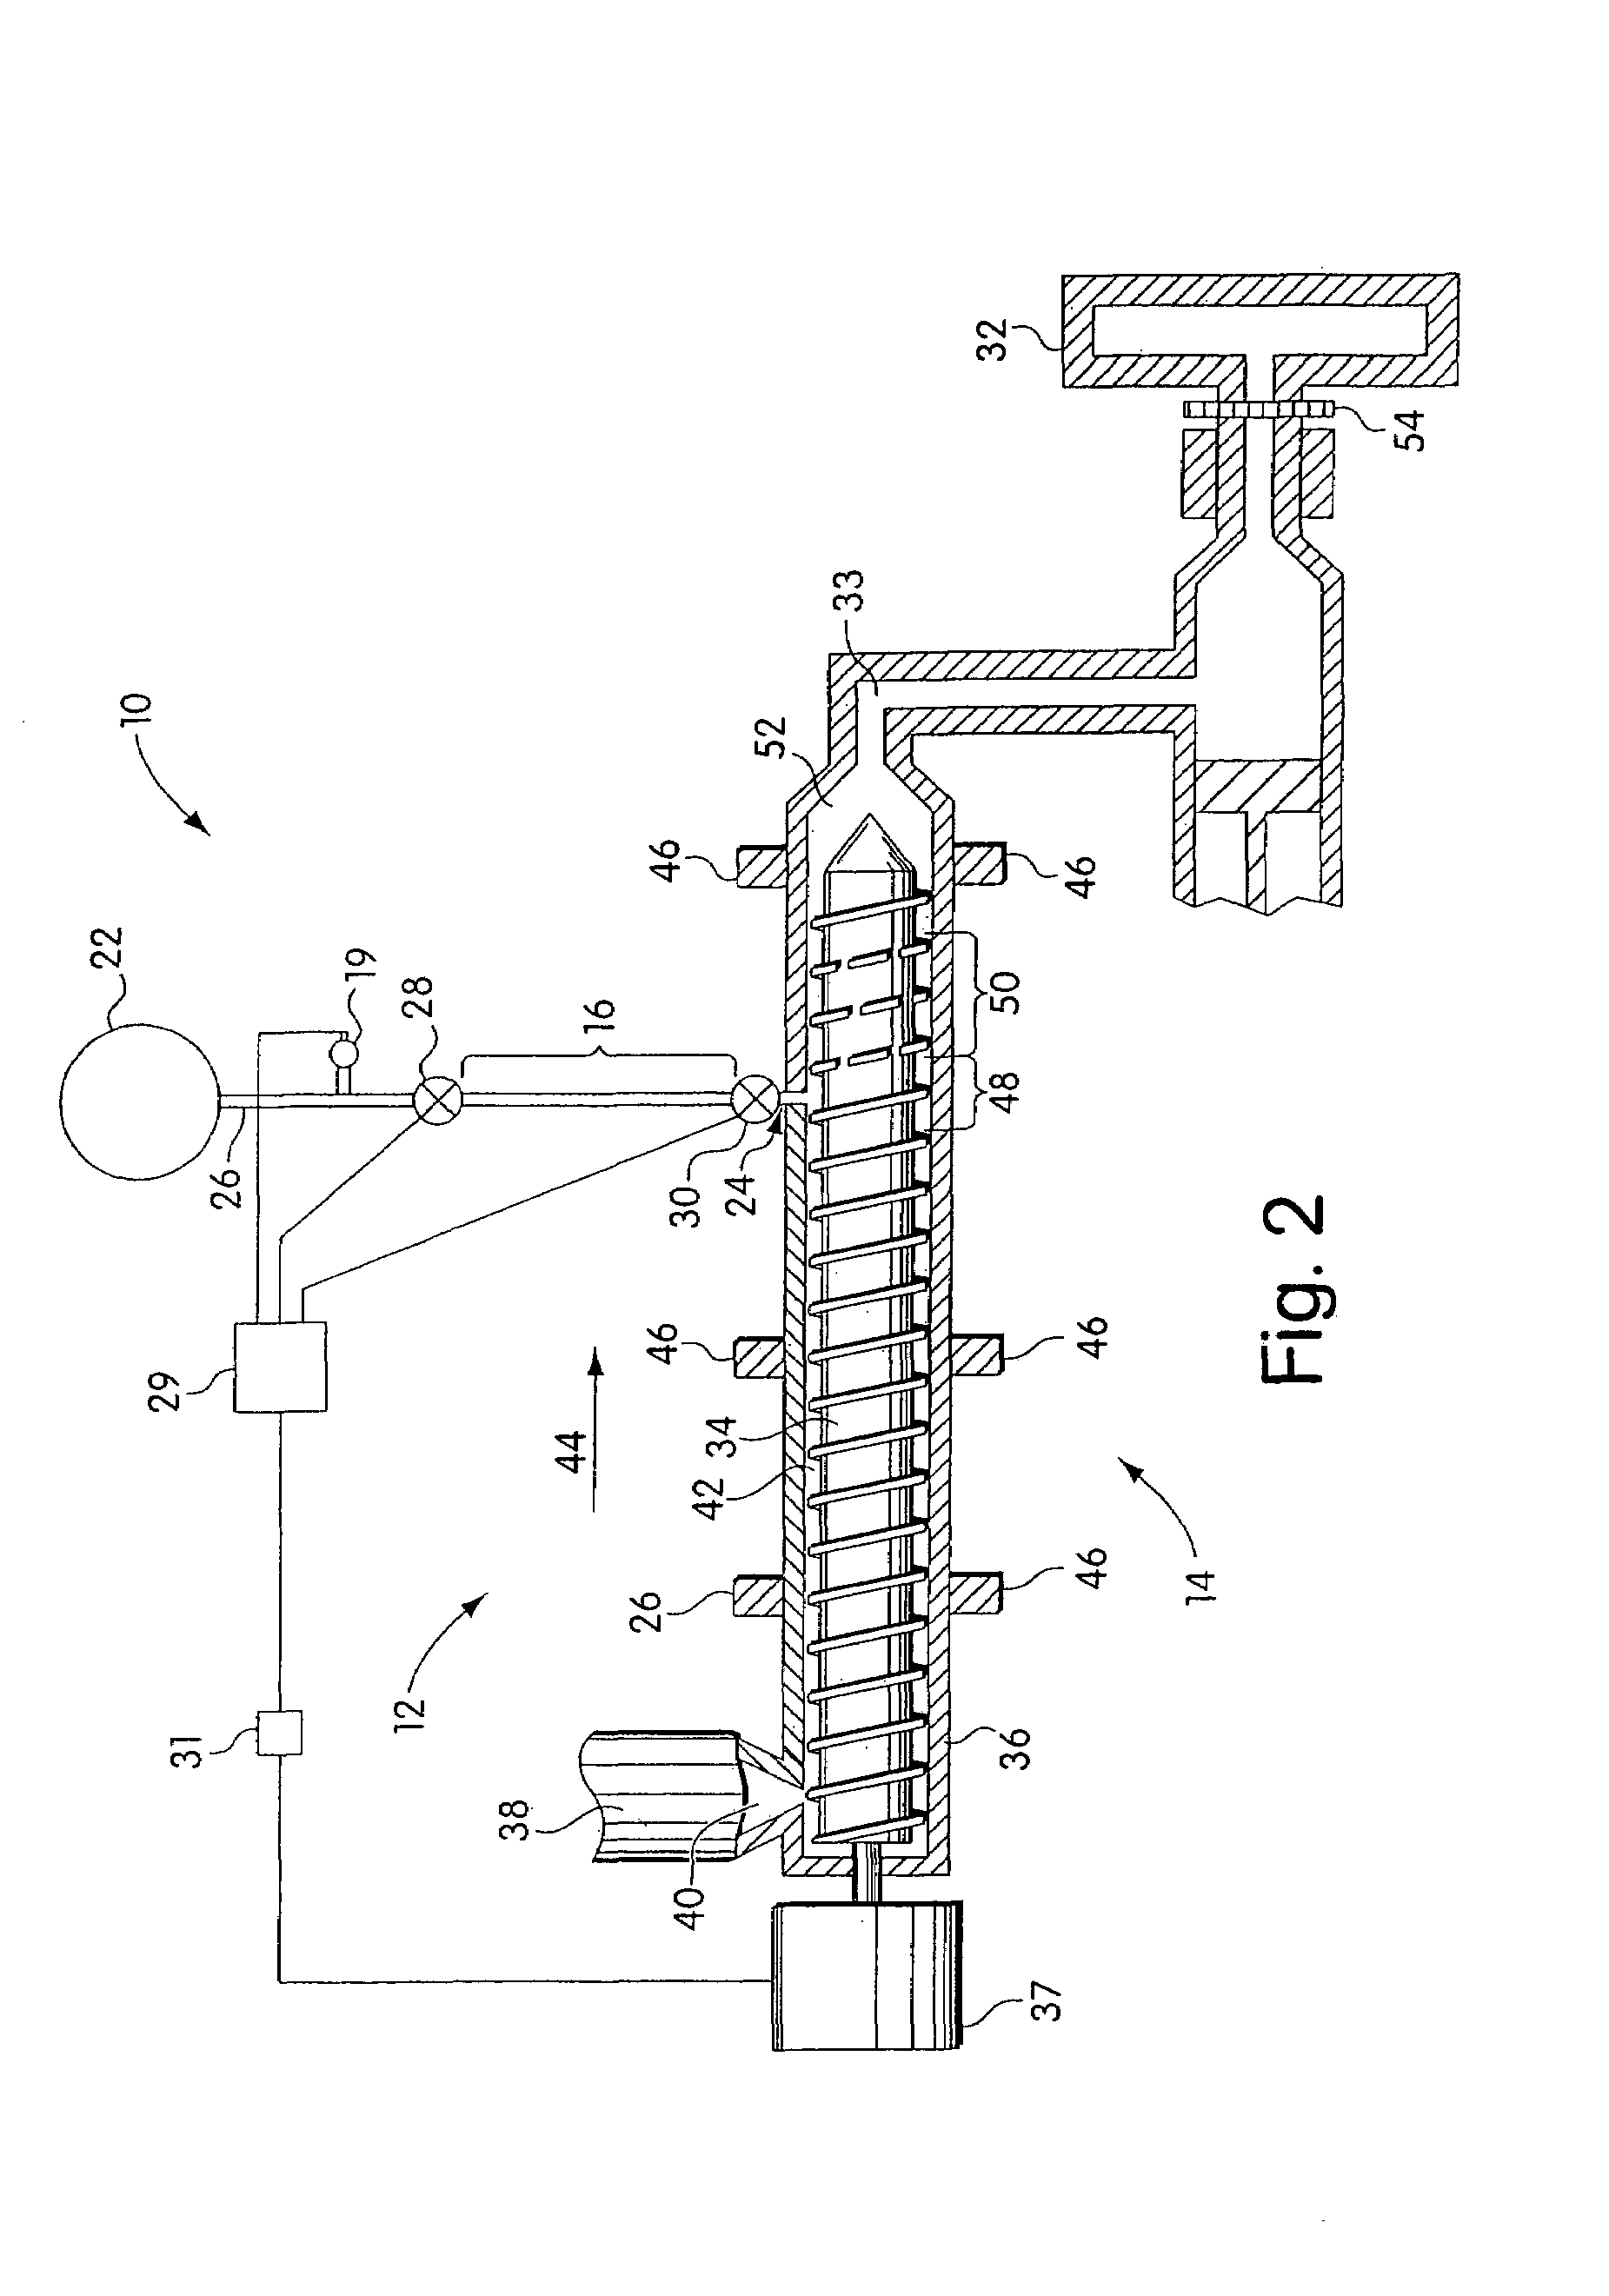 Blowing agent introduction systems and methods